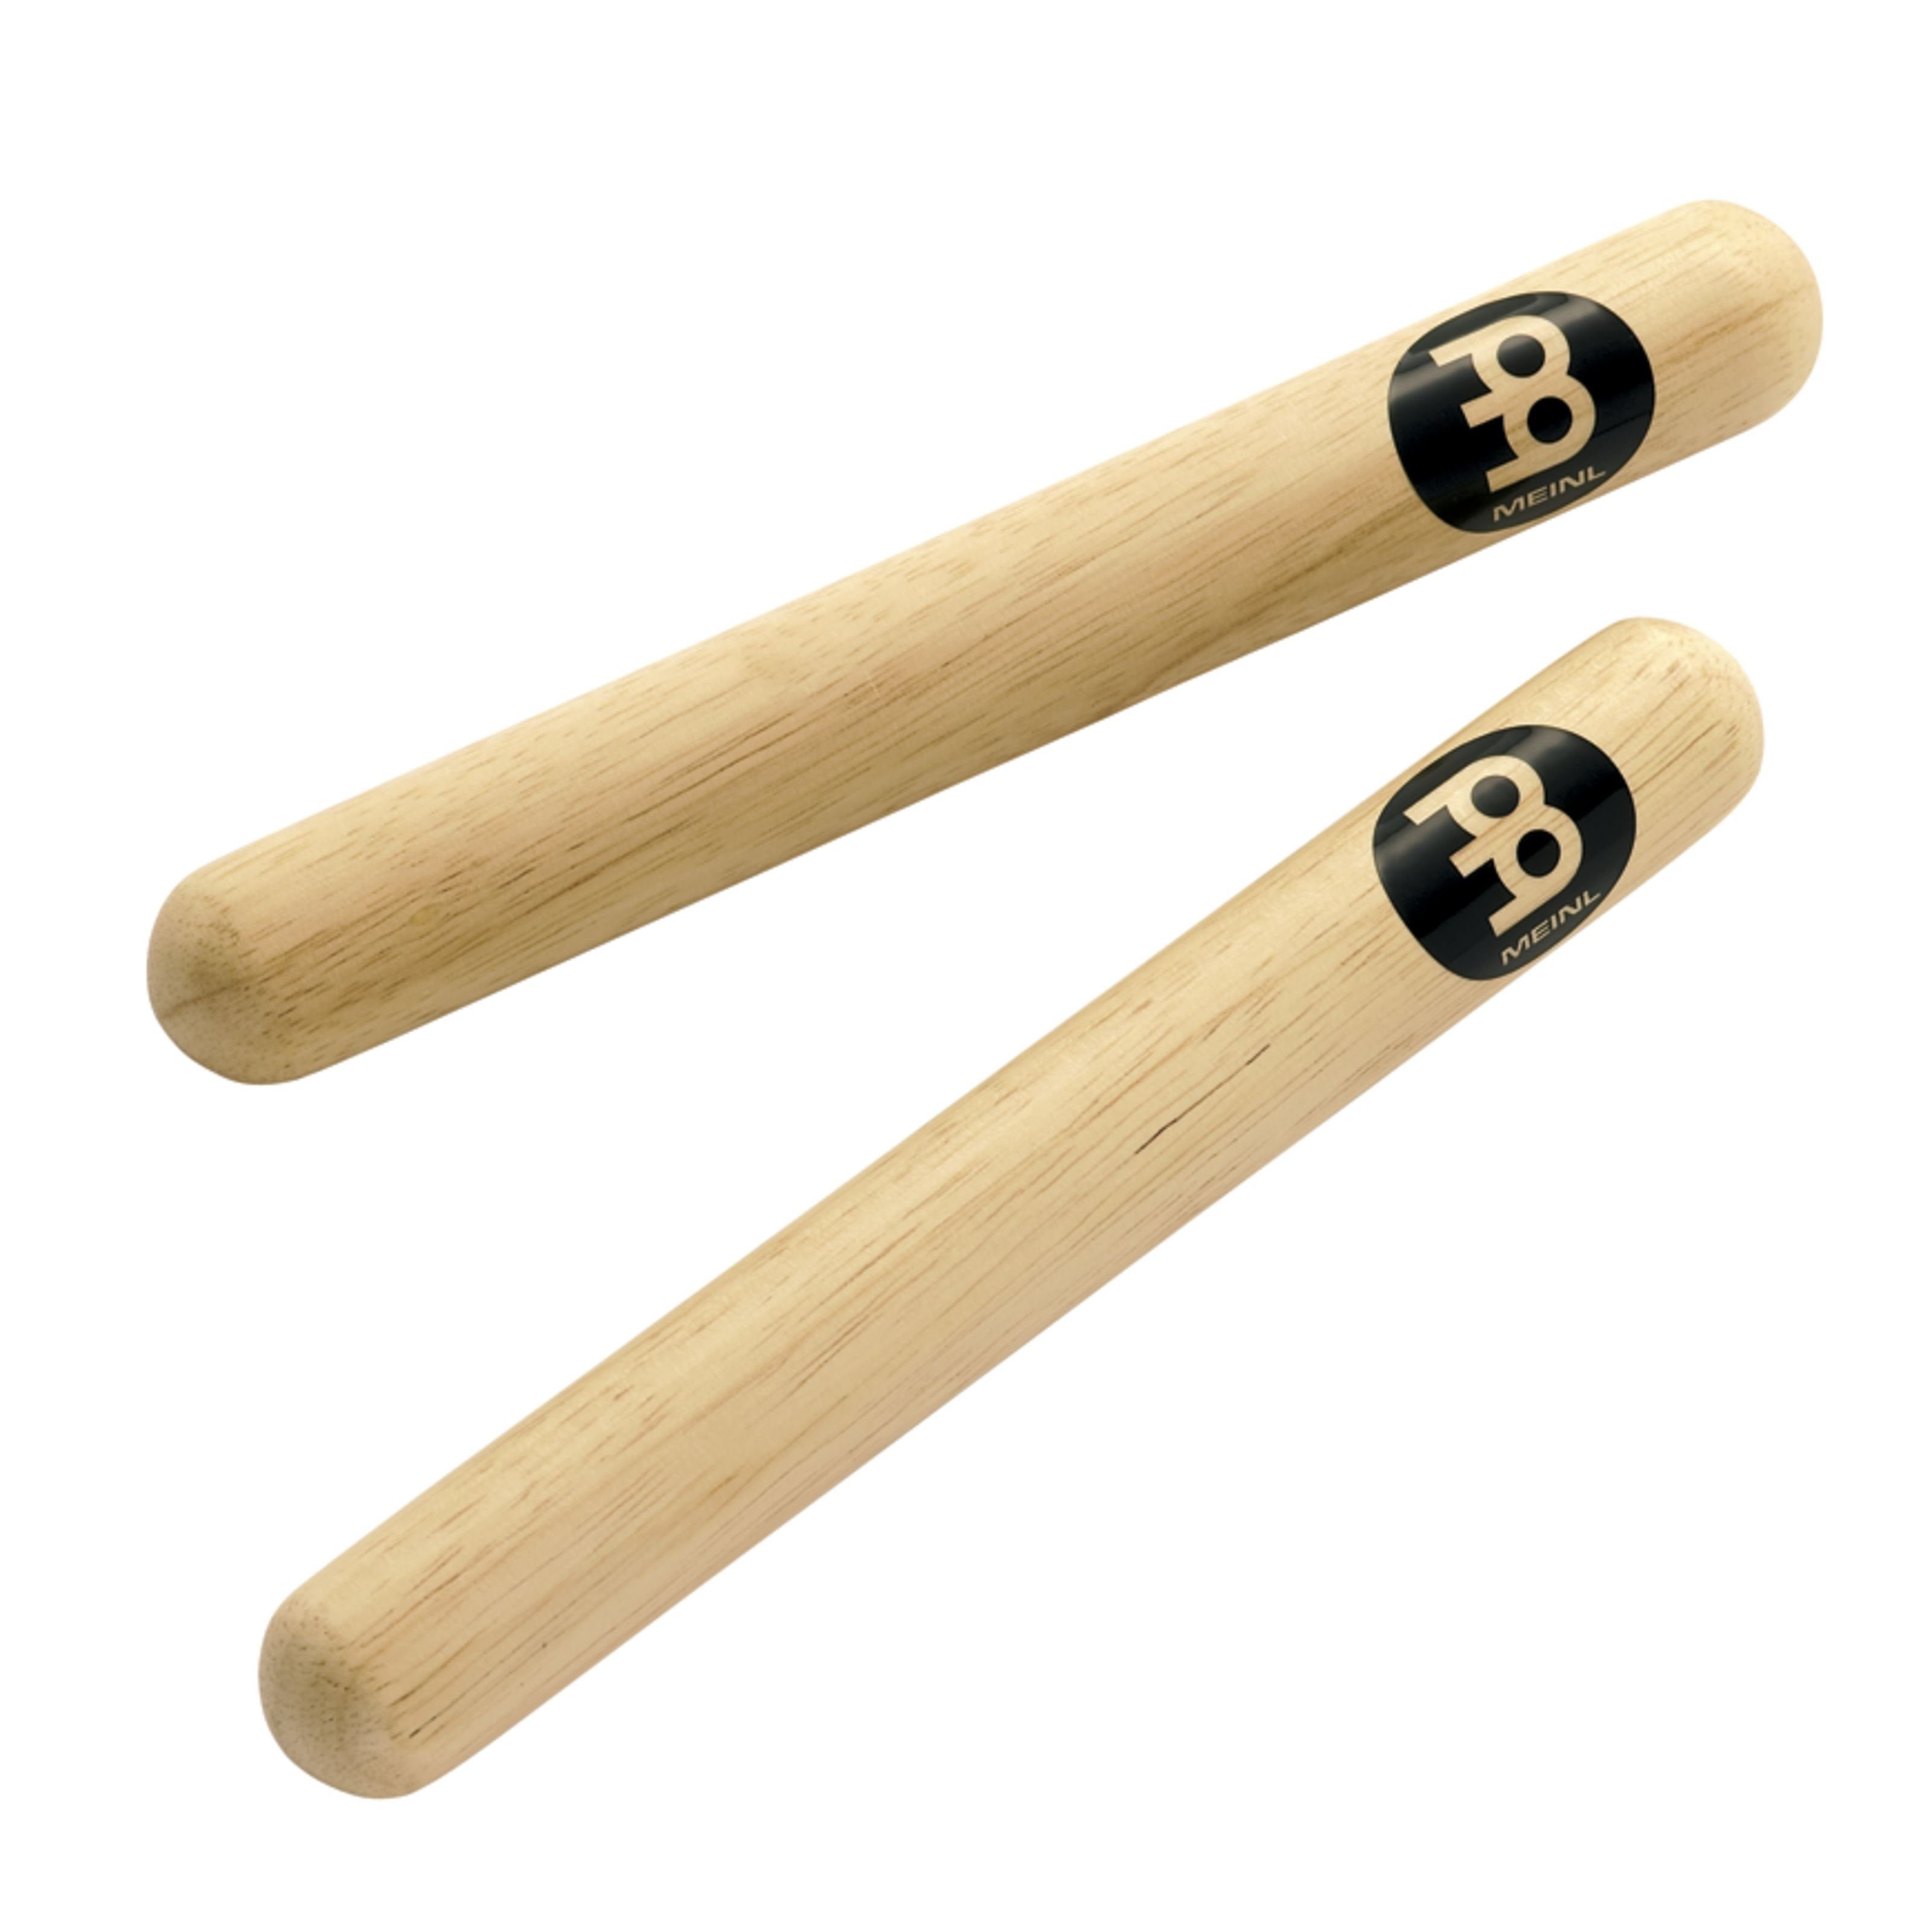 Meinl Percussion Claves, Percussion, Claves, CL1HW Hardwood Claves - Claves